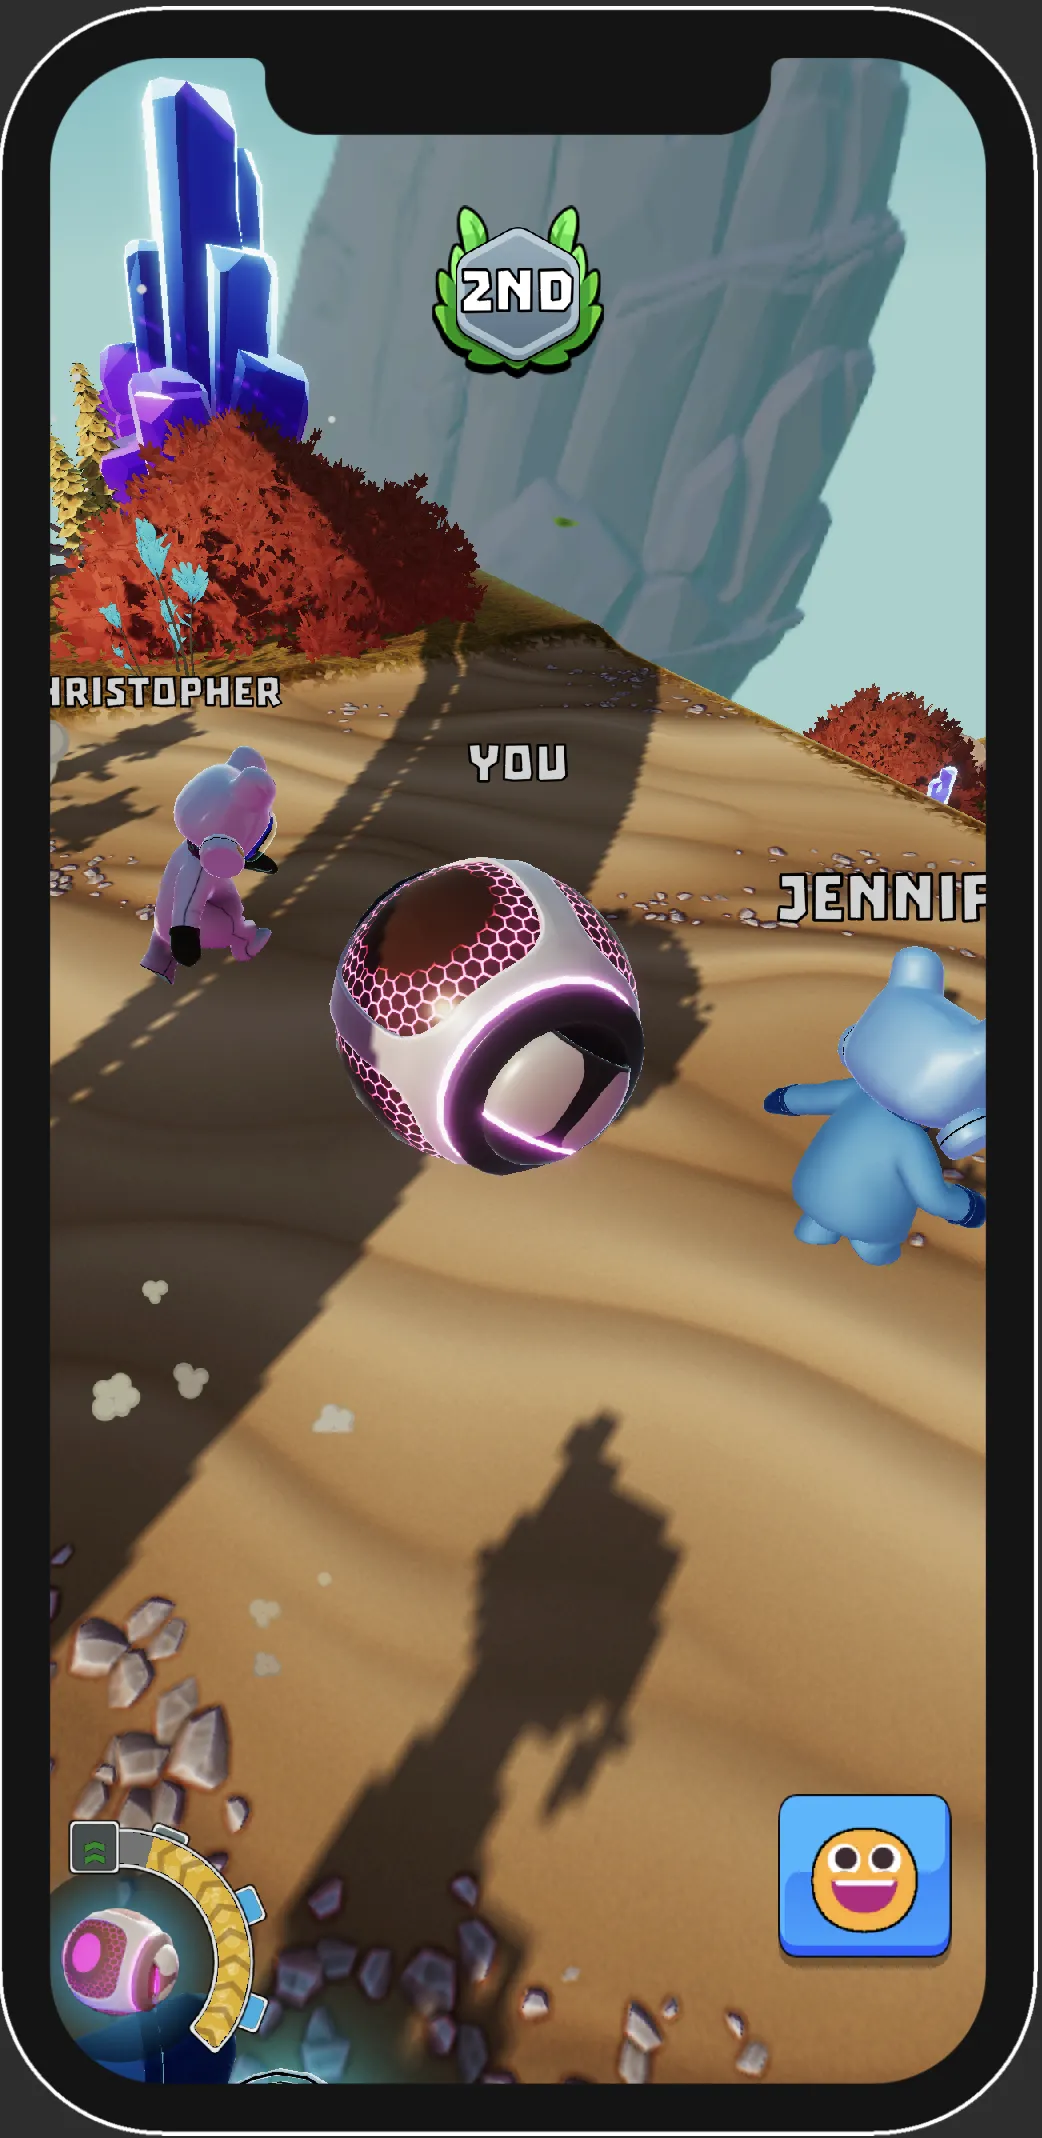 The player is now riding gear to finish this terrain in AFAR Rush. Unlike the other players that will simply jump, the hero will use this gear to gain an advantage